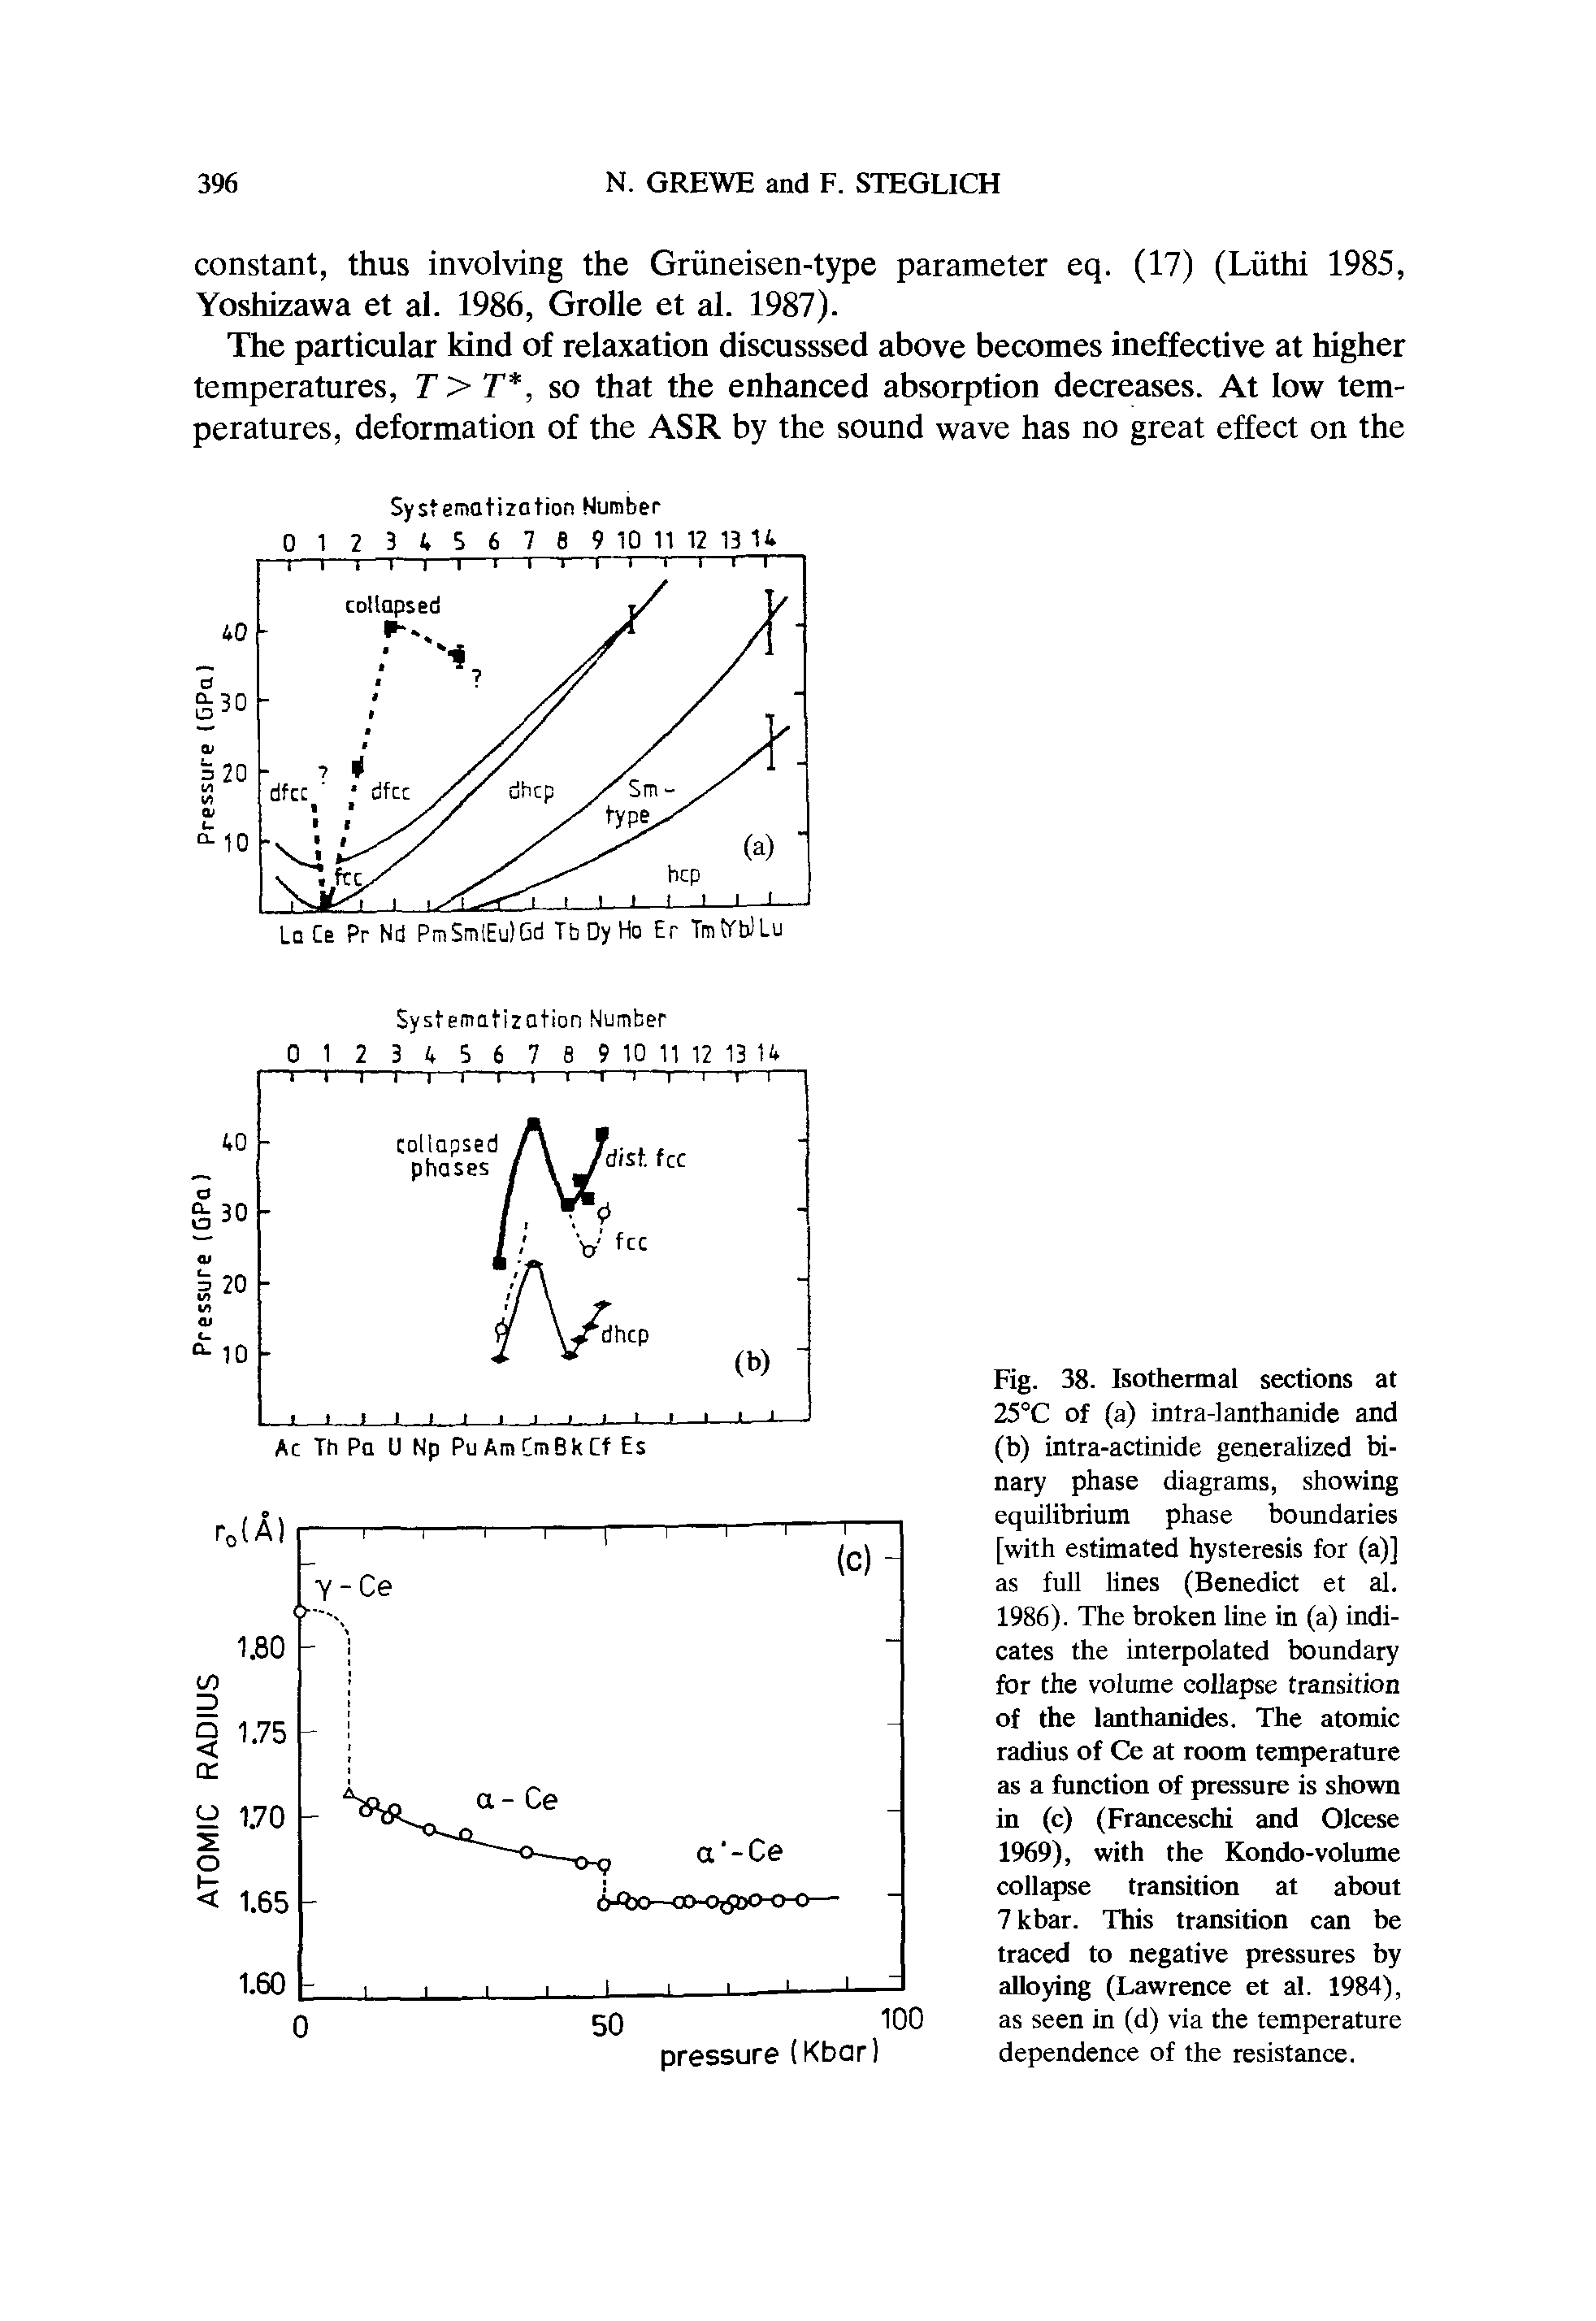 Fig. 38. Isothermal sections at 25°C of (a) intra-lanthanide and (b) intra-actinide generalized binary phase diagrams, showing equilibrium phase boundaries [with estimated hysteresis for (a)] as full hnes (Benedict et al. 1986). The broken line in (a) indicates the interpolated boundary for the volume collapse transition of the lanthanides. The atomic radius of Ce at room temperature as a function of pressure is shown in (c) (Franceschi and Olcese 1969), with the Kondo-volume collapse transition at about 7 kbar. This transition can be traced to negative pressures by alloying (Lawrence et al. 1984), as seen in (d) via the temperature dependence of the resistance.